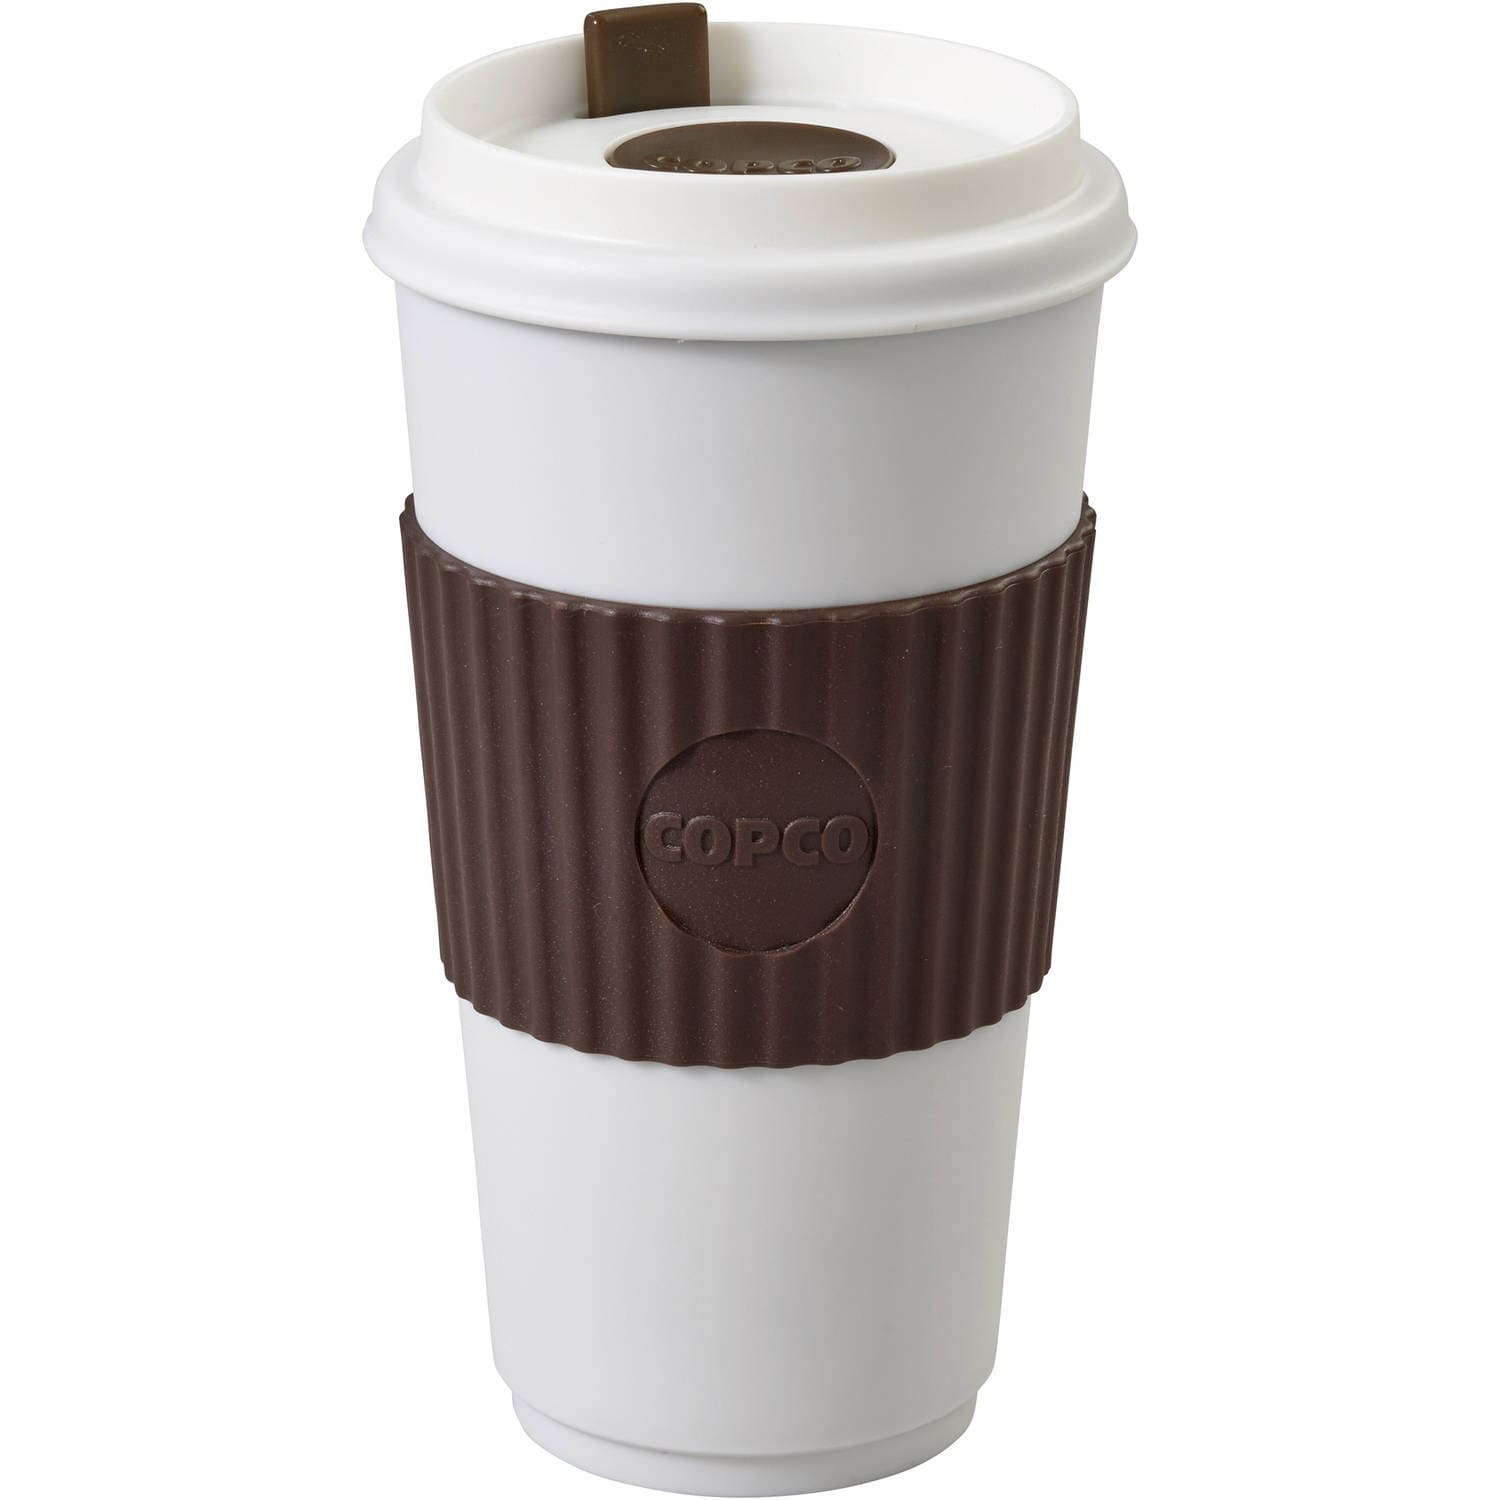 https://ak1.ostkcdn.com/images/products/is/images/direct/1b51dacb7eb1c30b2fe14cb76f2f0853c7e80741/Copco-To-Go-Travel-Mug-With-Textured-Non-Slip-Sleeve---Double-Wall-Insulation-BPA-Free-16-Oz---Brown---White.jpg